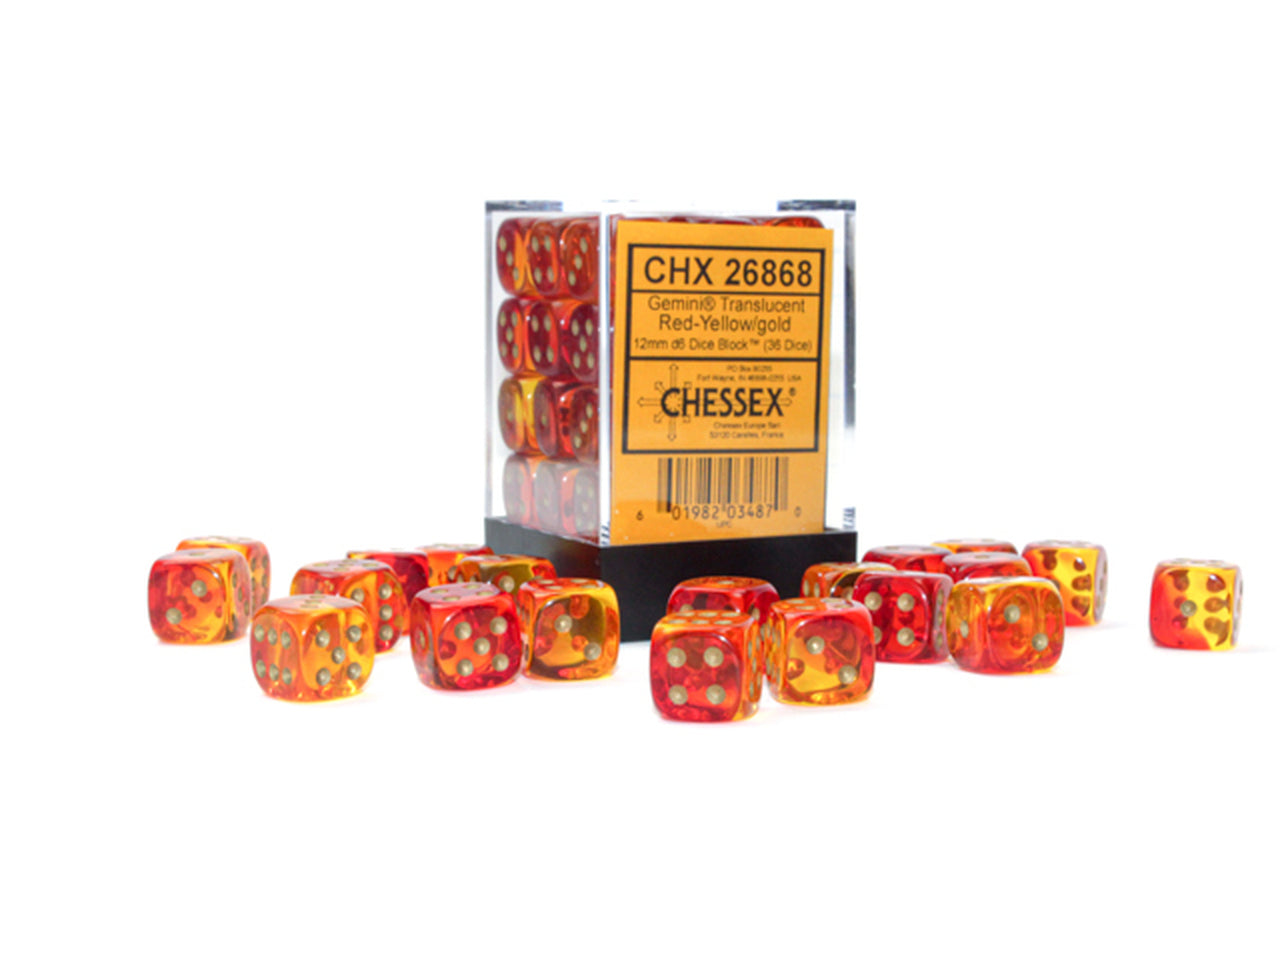 CHESSEX GEMINI 36-DIE CUBE Translucent Red-Yellow/Gold (CHX26868) | Eastridge Sports Cards & Games